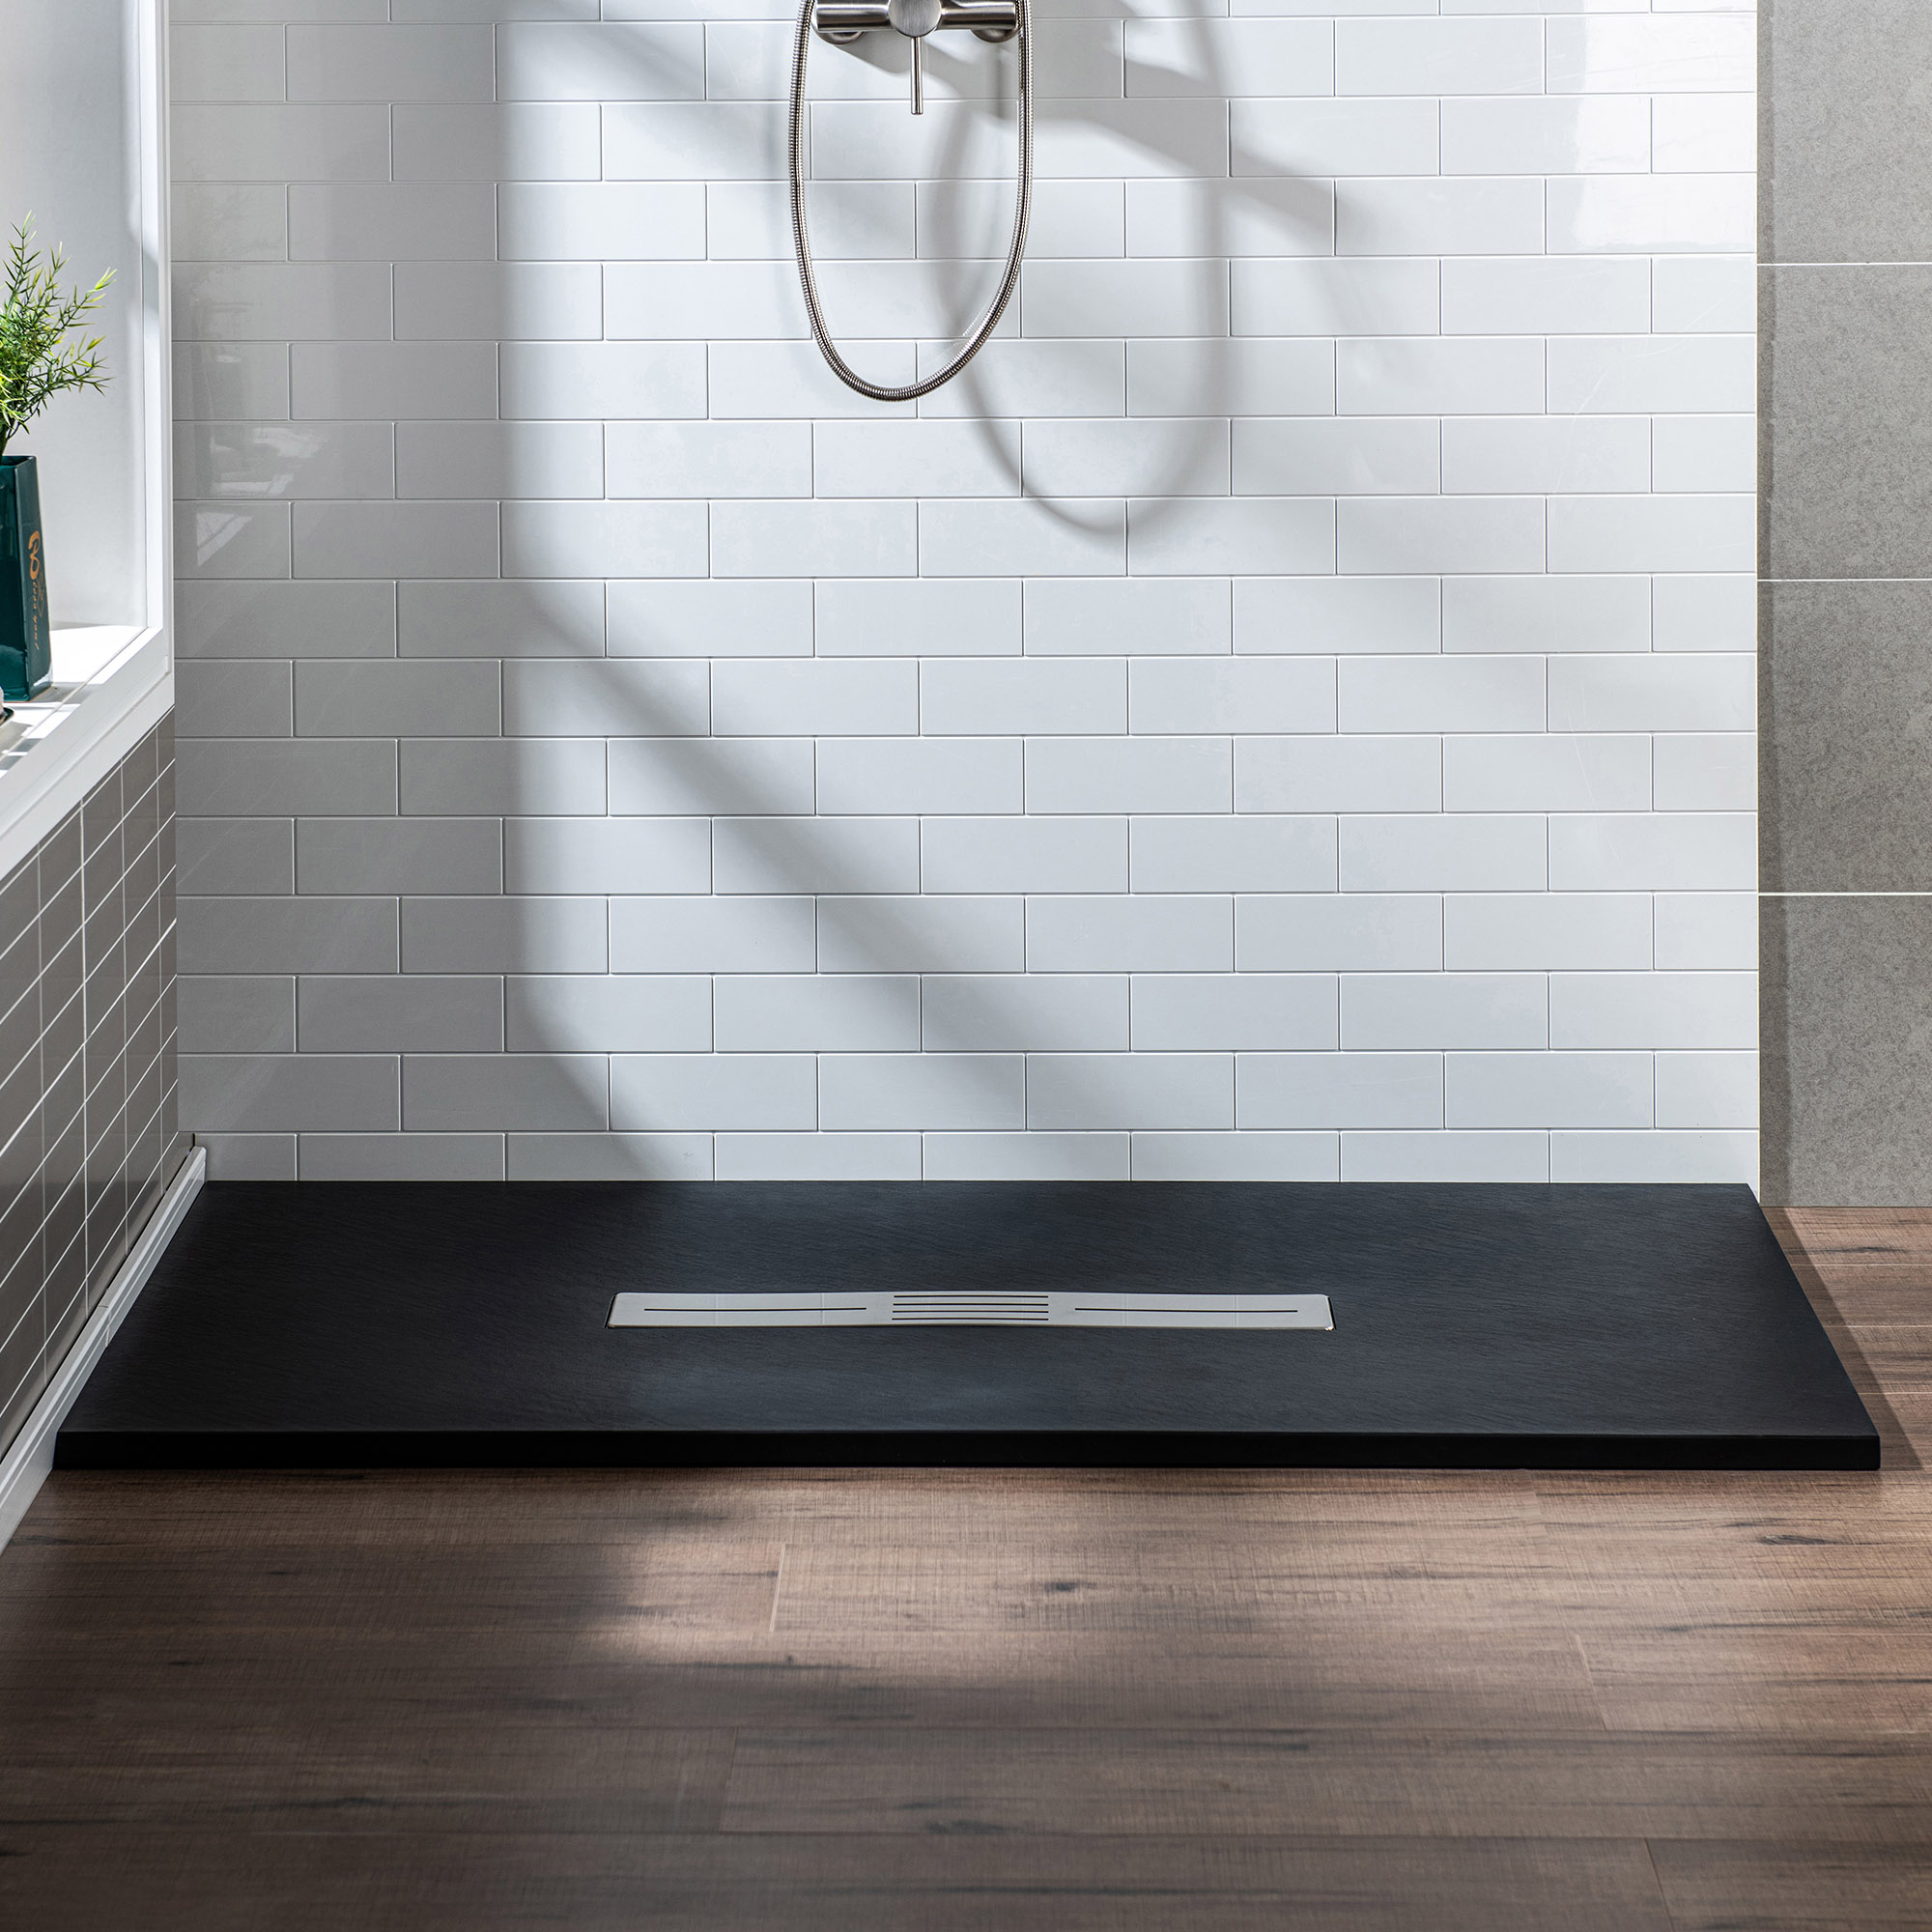  WOODBRIDGE 48-in L x 36-in W Zero Threshold End Drain Shower Base with Center Drain Placement, Matching Decorative Drain Plate and Tile Flange, Wheel Chair Access, Low Profile, Black_12541